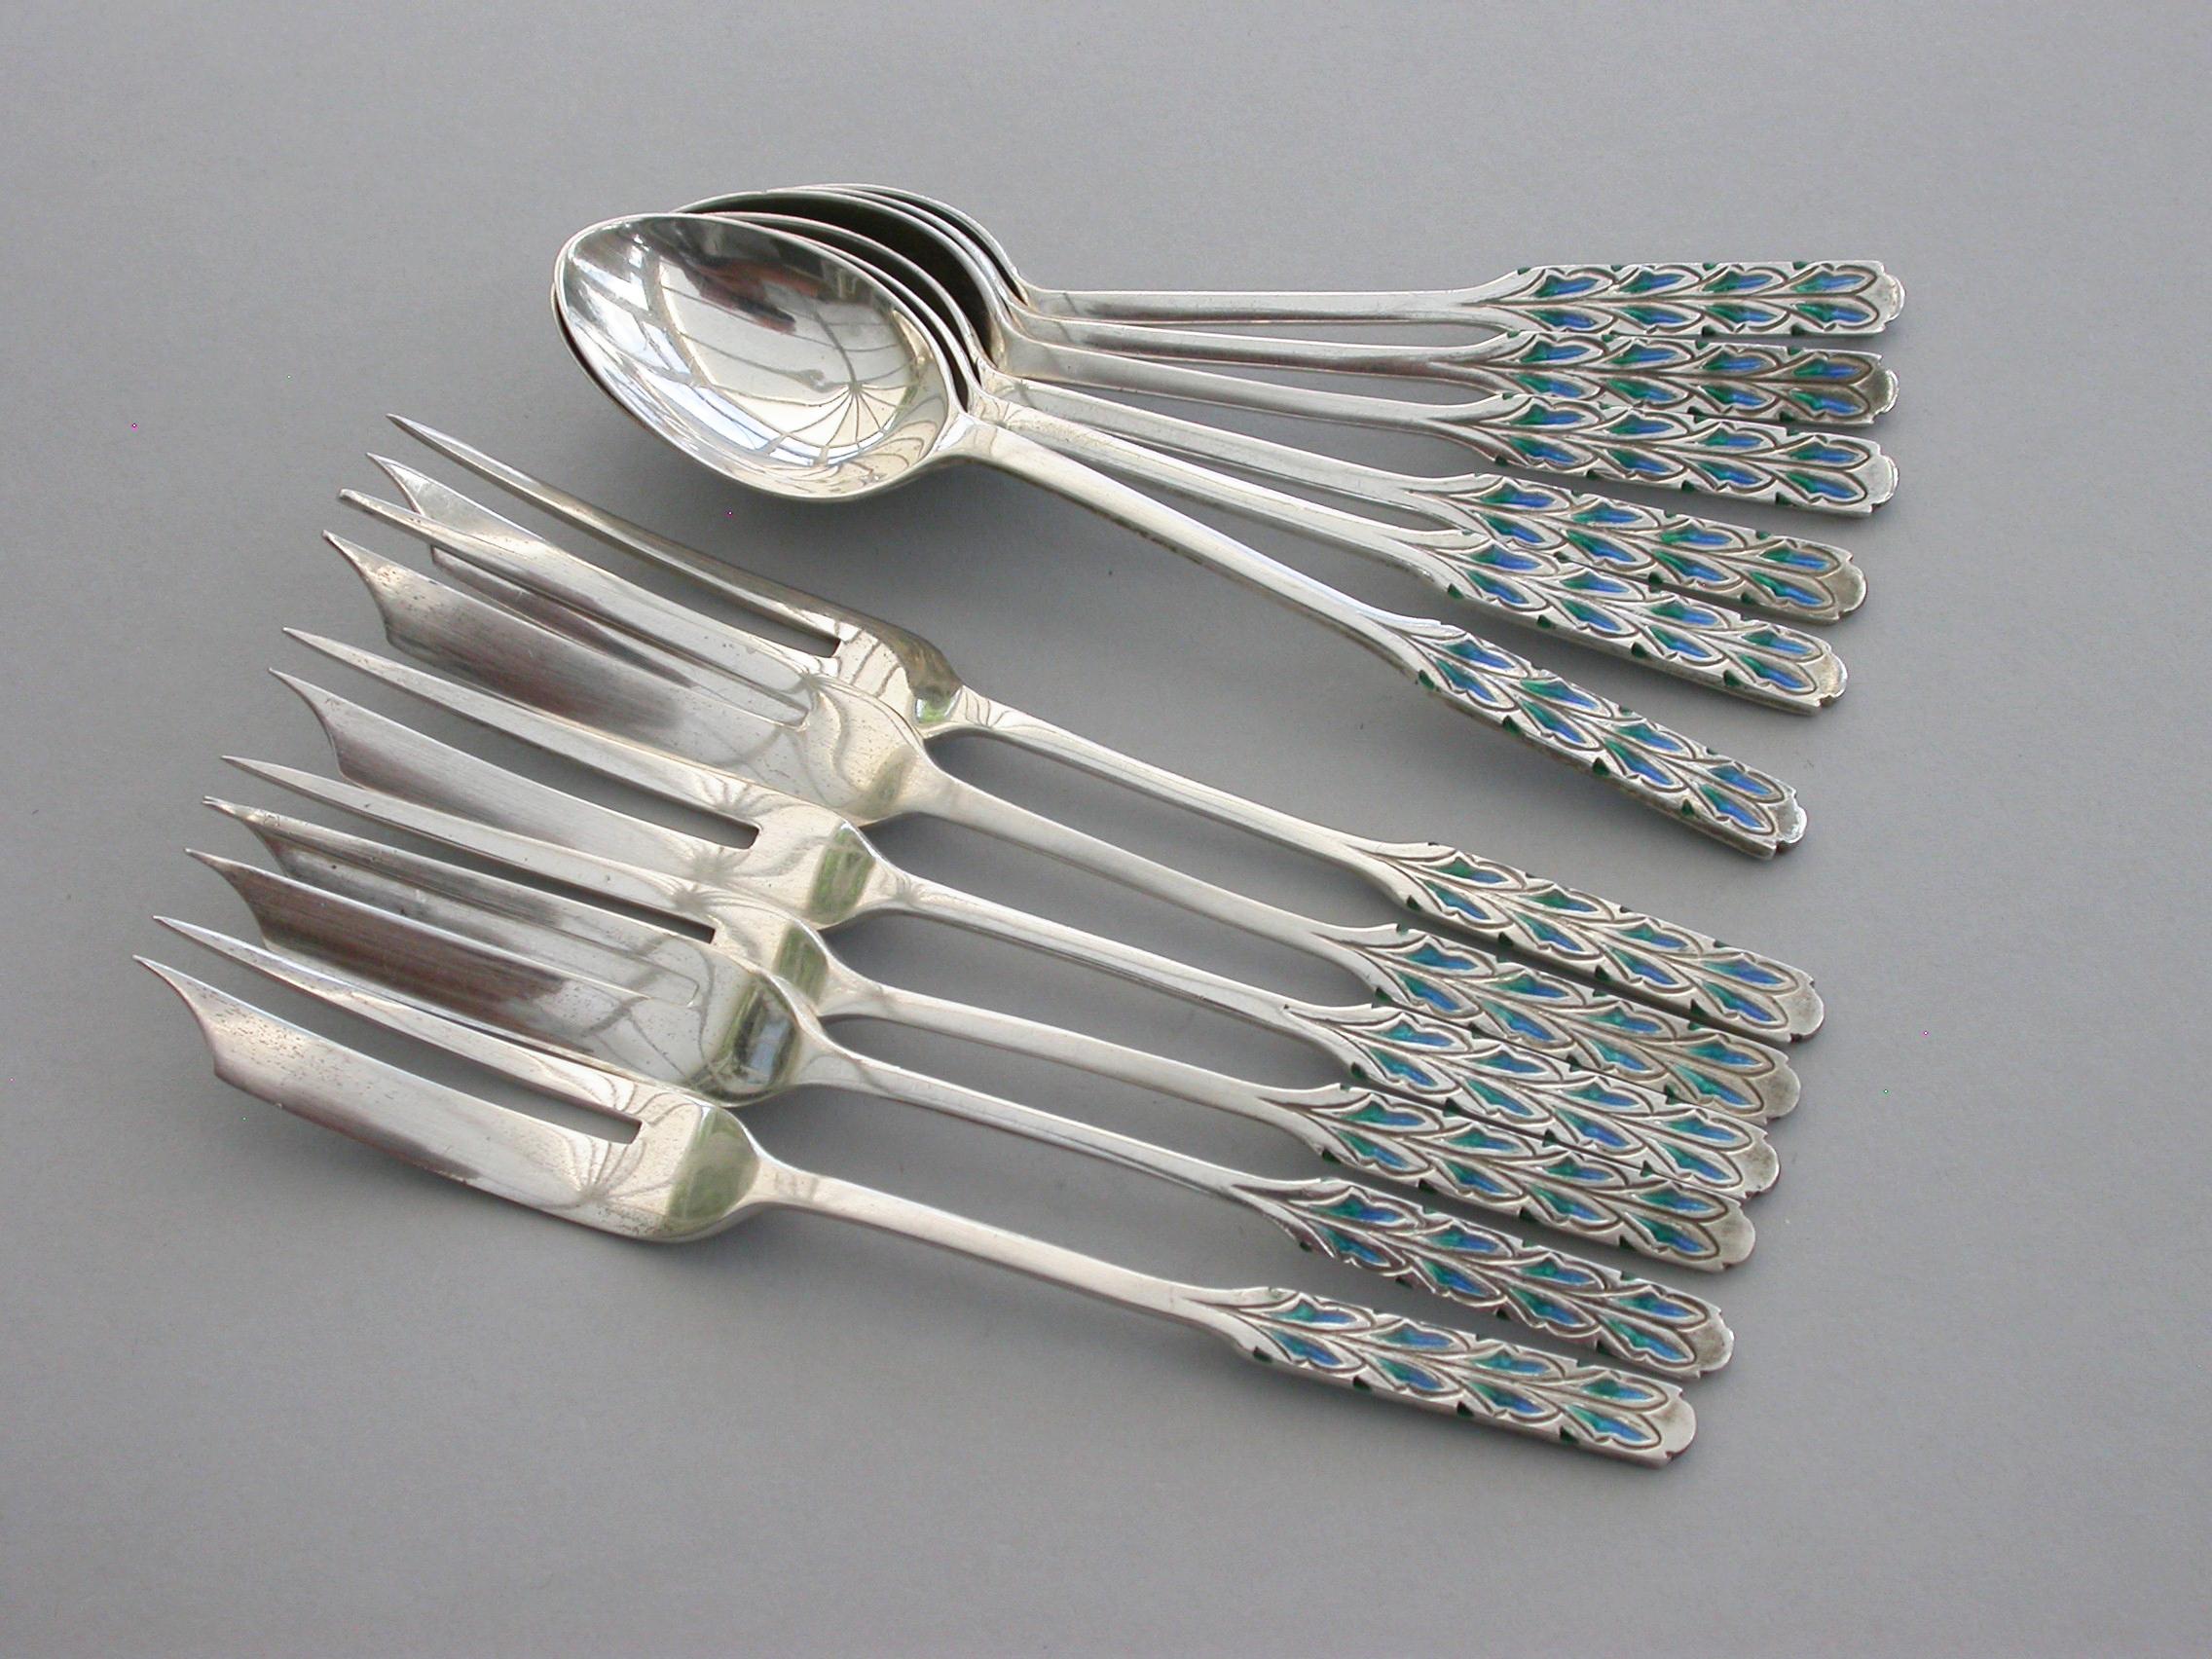 Cased Set 12 Silver and Enamel Pastry Spoons & Forks by Liberty & Co, 1927-1928 For Sale 4